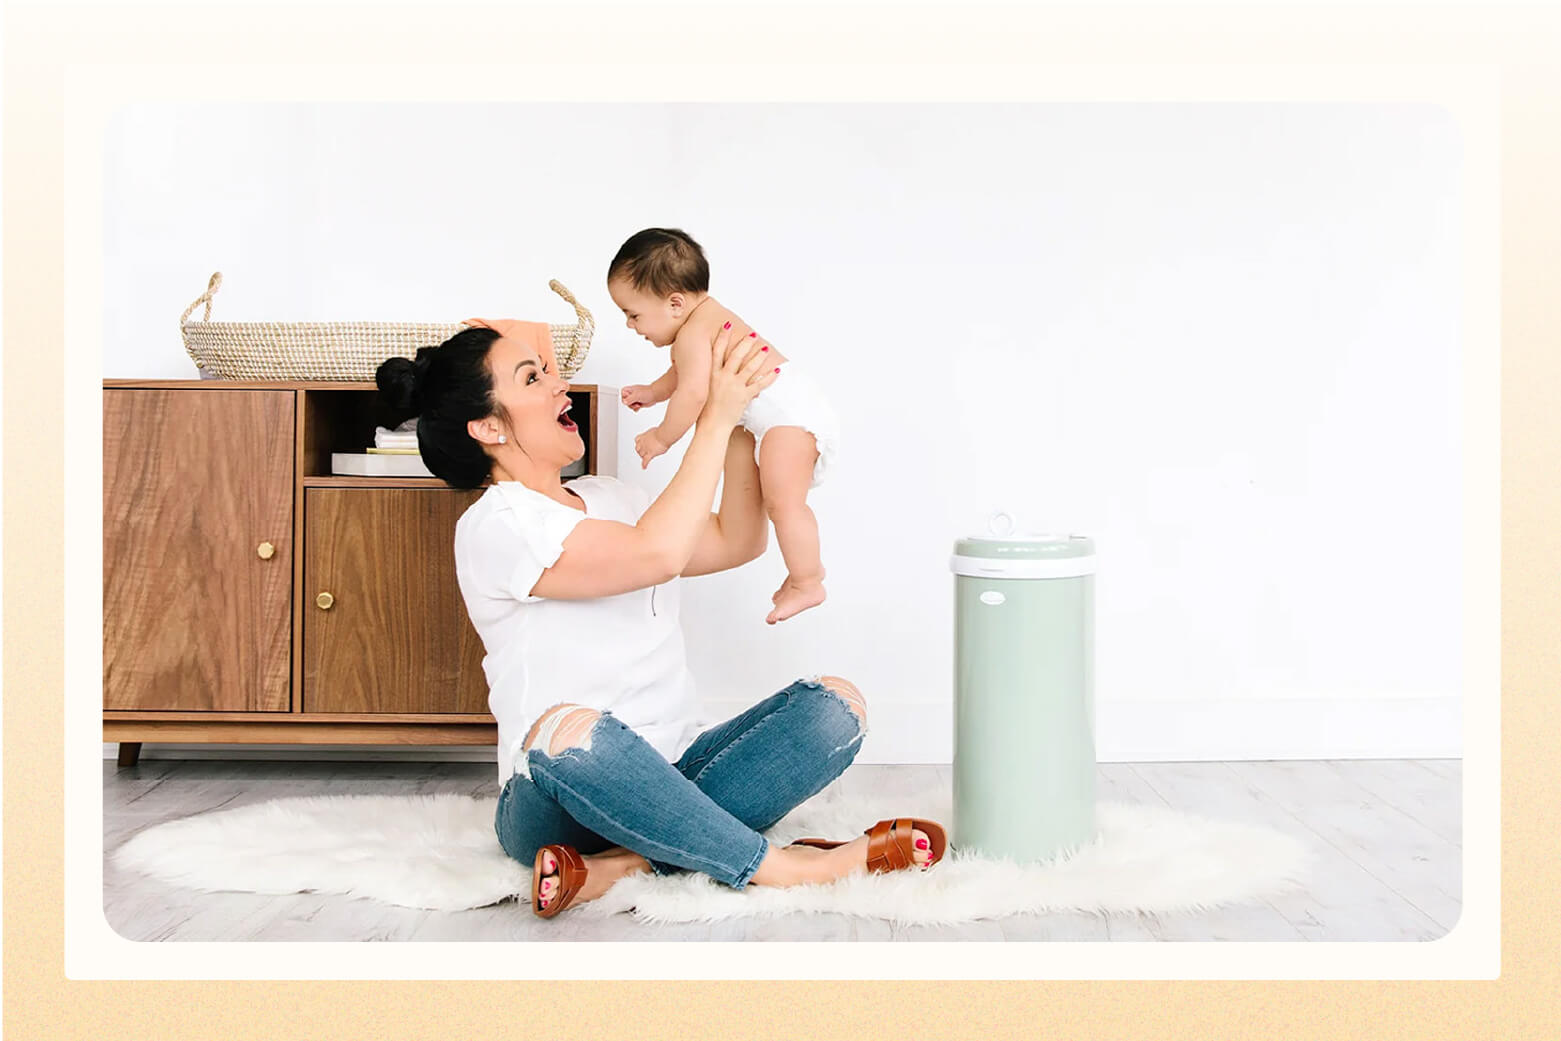 Woman sitting on floor next to a green diaper pail as she holds her baby up in the air with a big smile